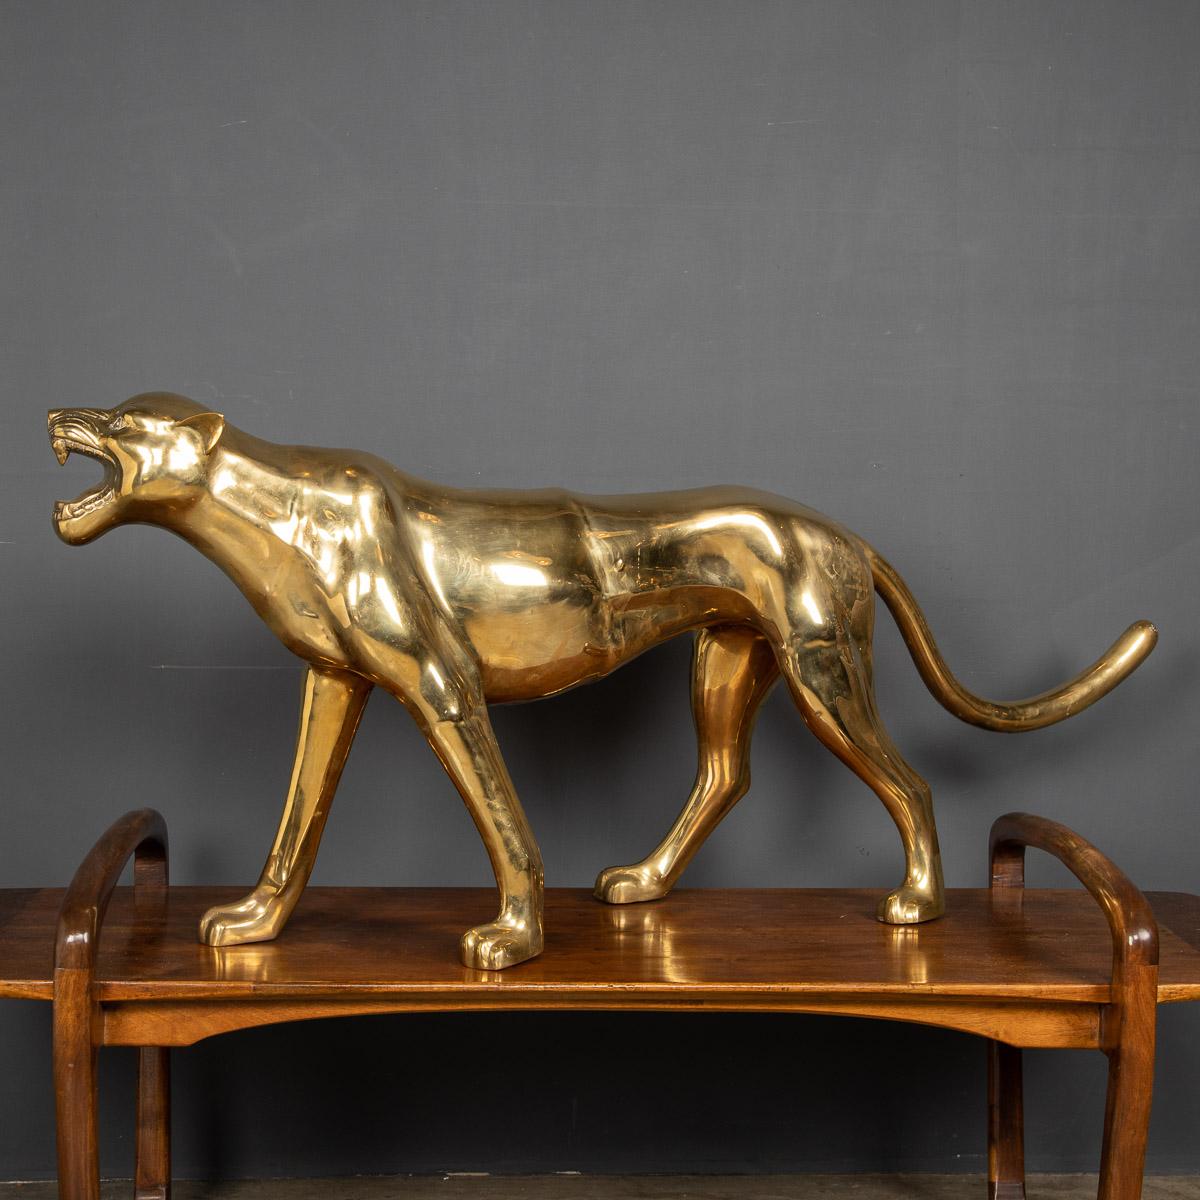 Stunning 20th Century large brass figure of a Panther.

Condition
In Great Condition - No Damage.

Size
Width: 132cm
Depth: 20cm
Height: 55cm.